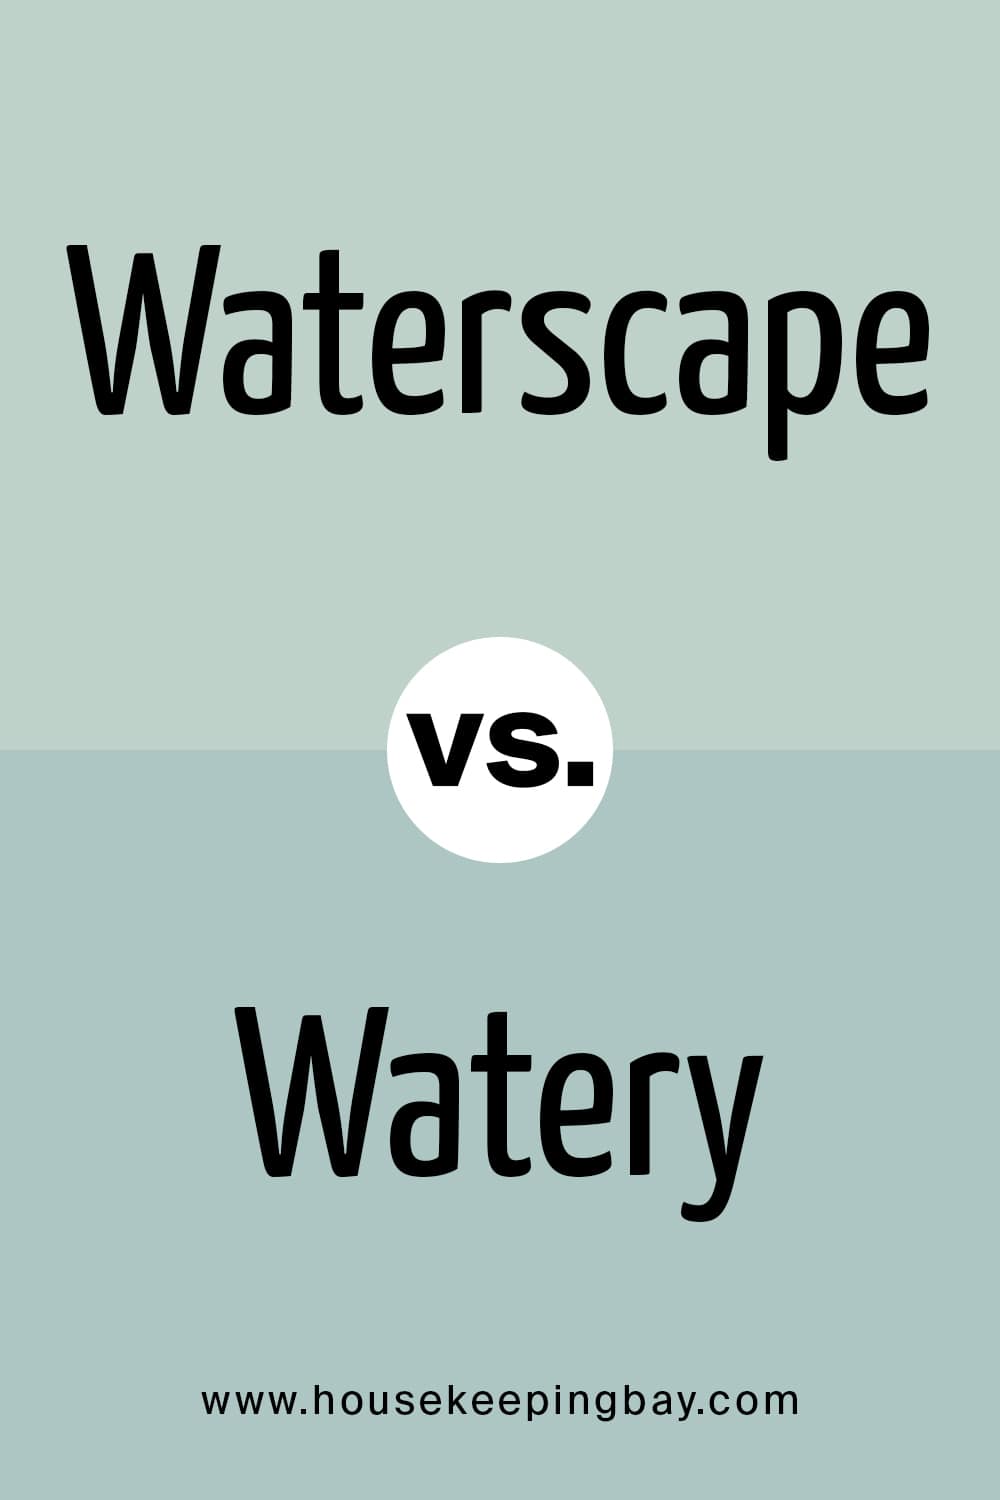 Waterscape VS Watery